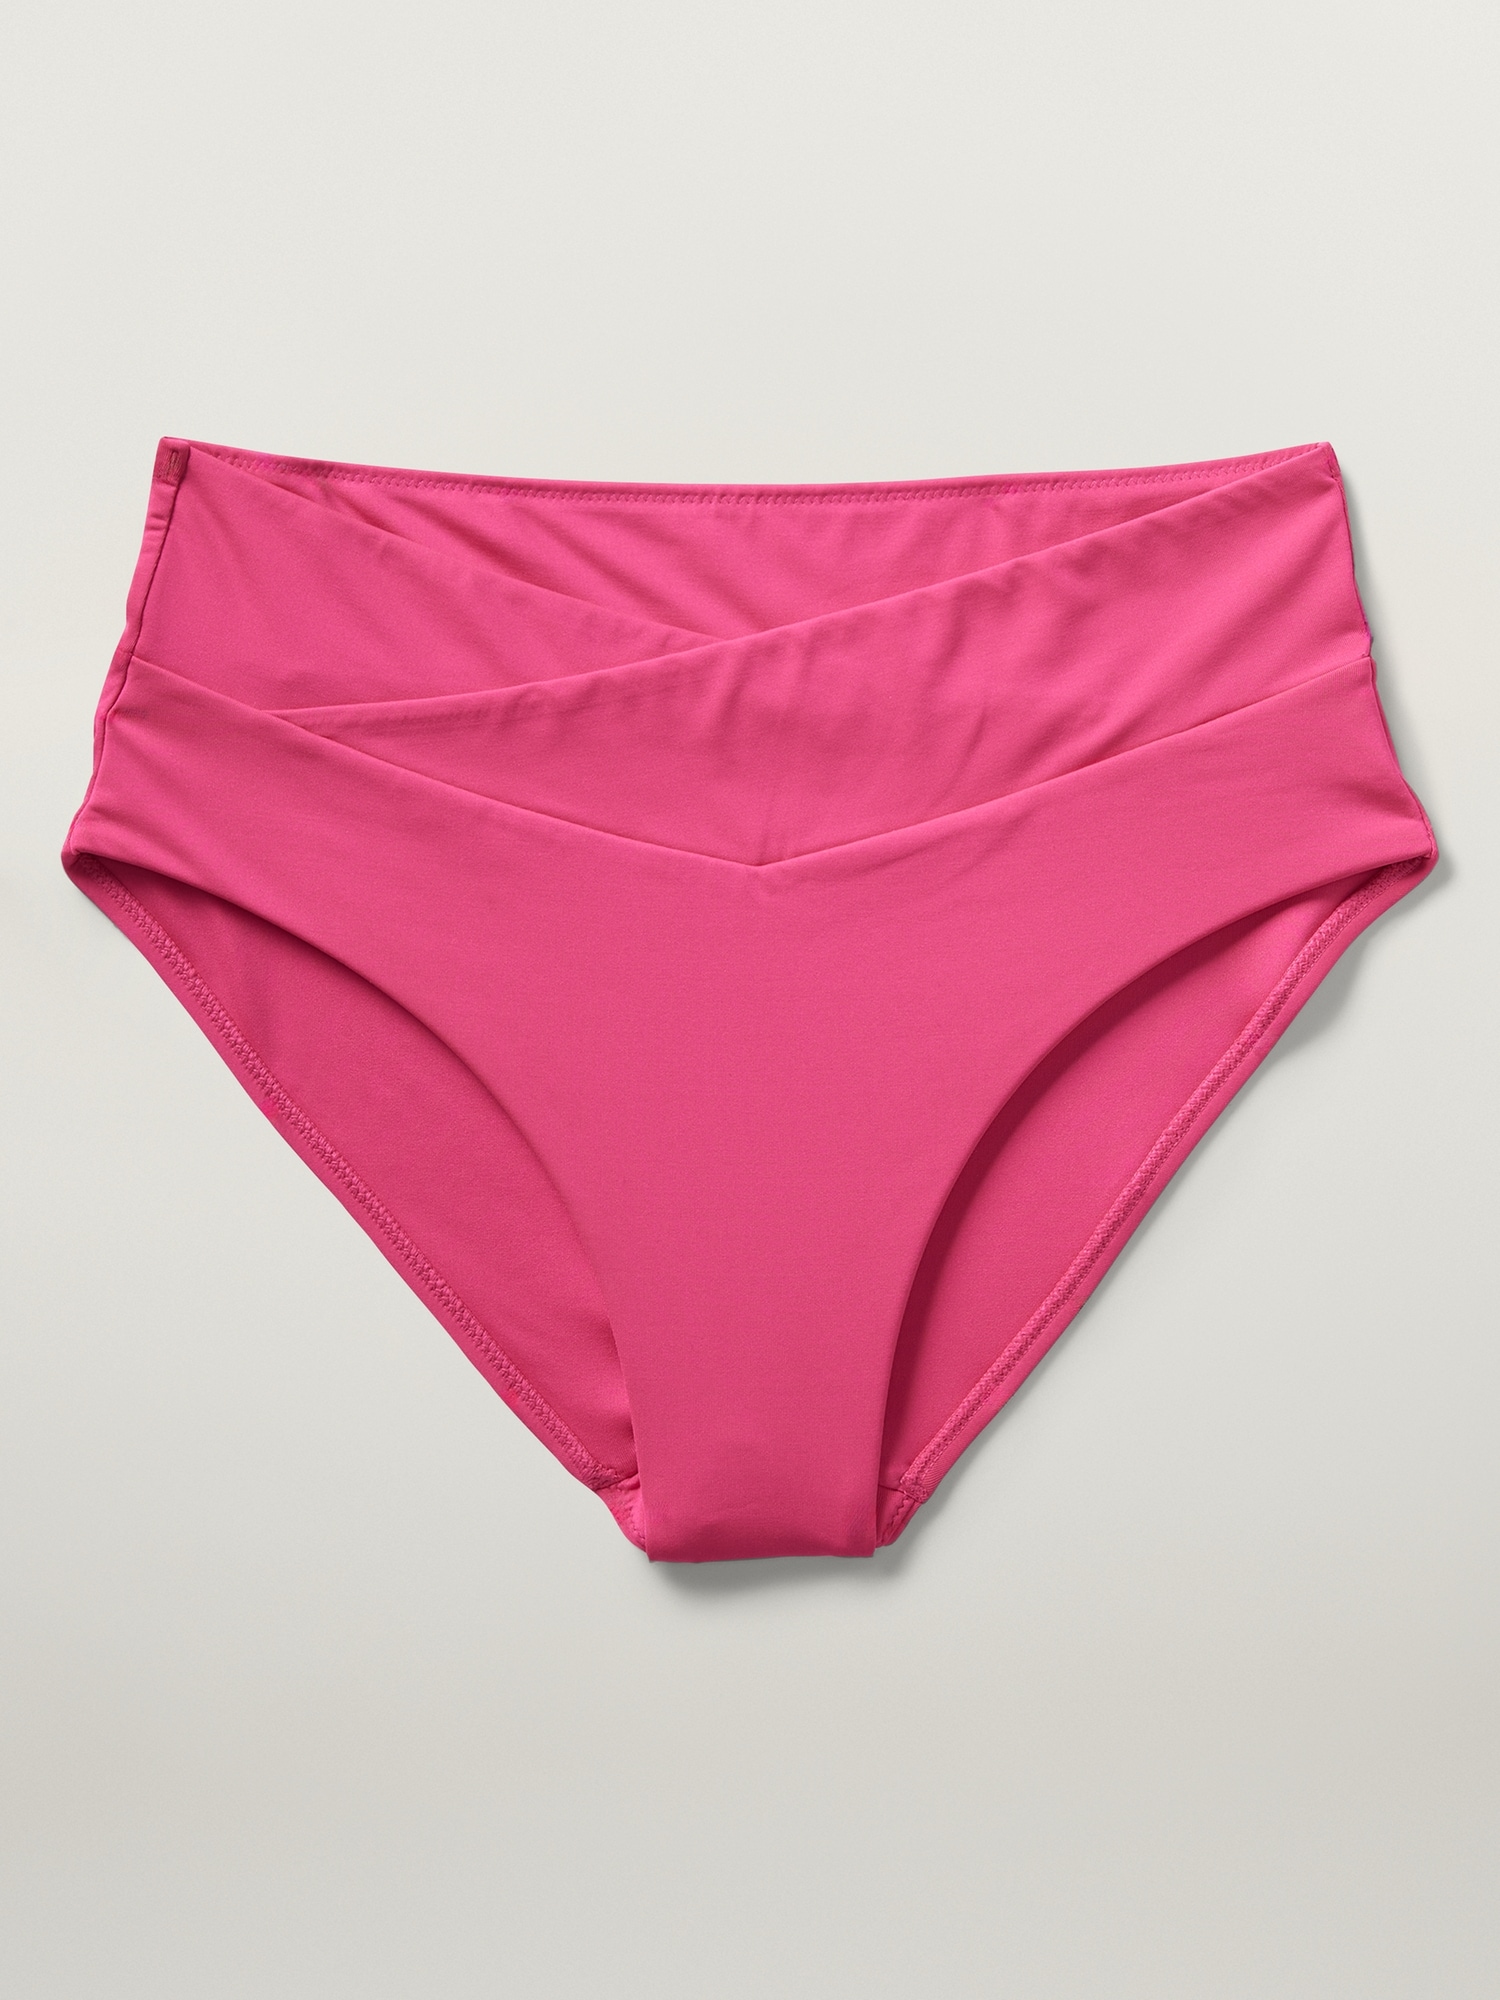 High waisted support bikini bottoms - 57 products